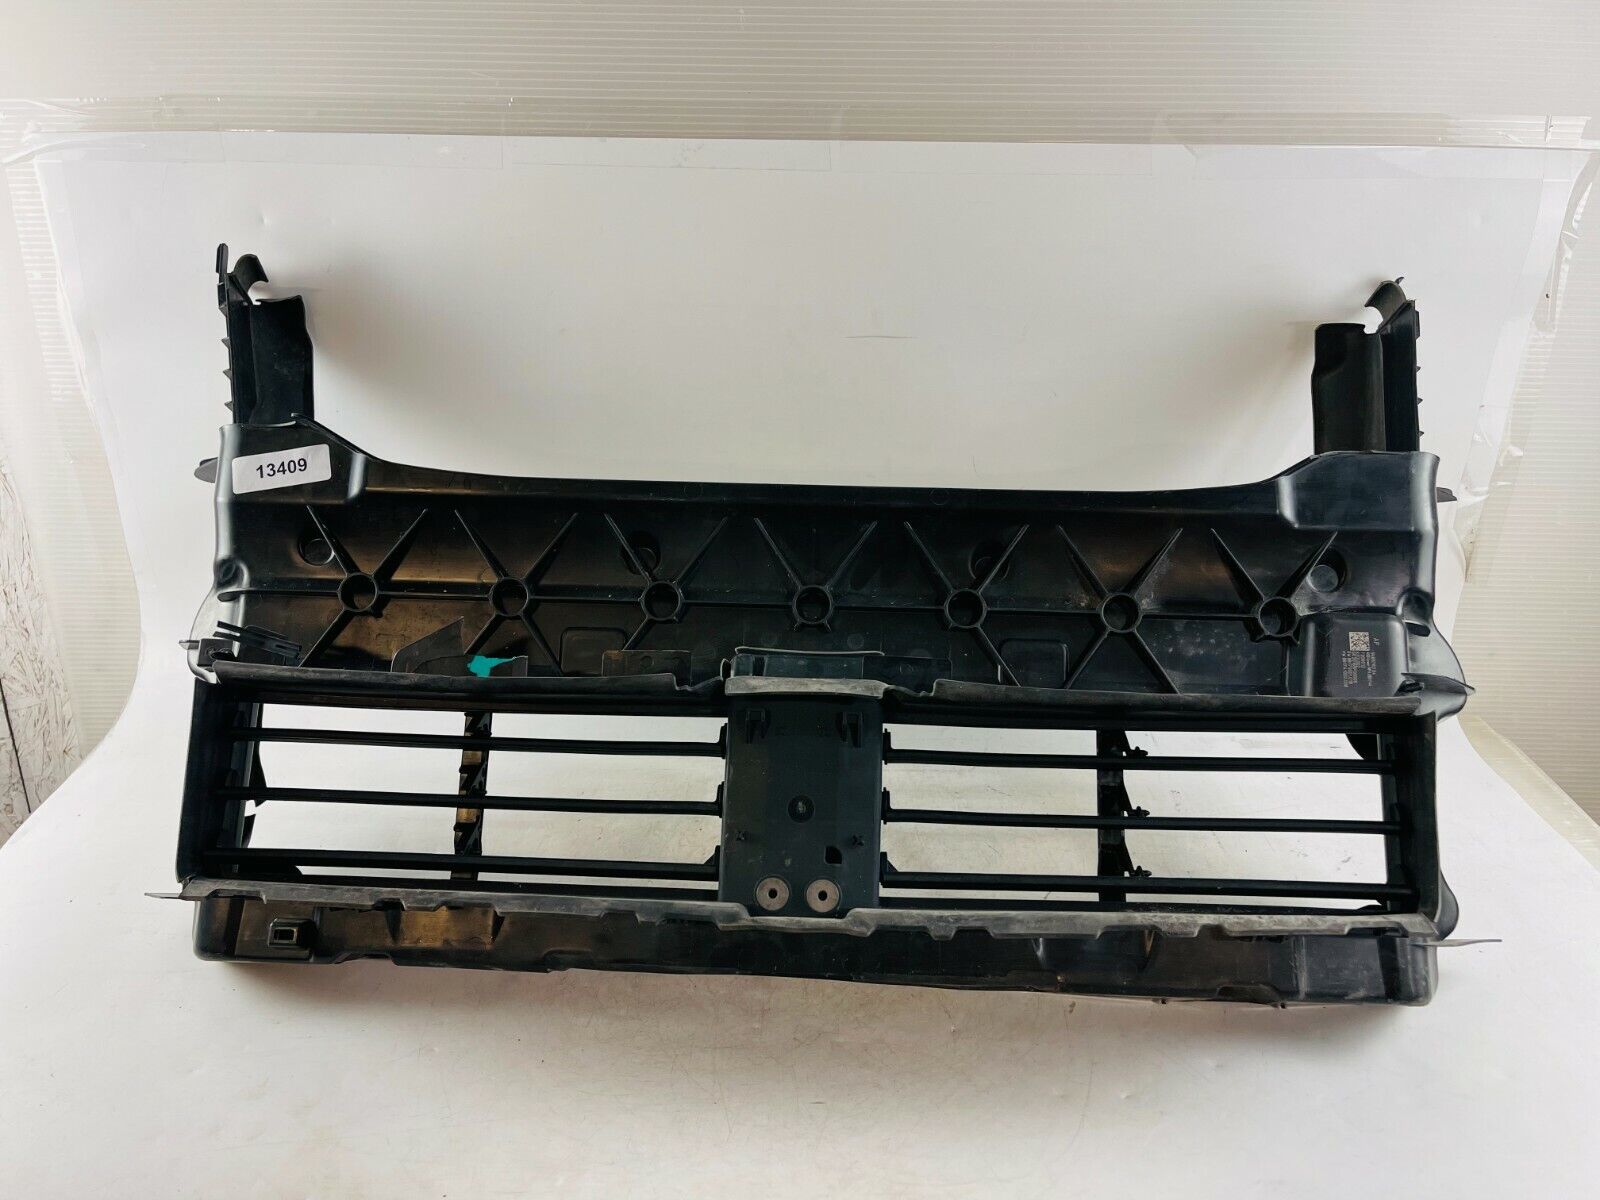 2019 2020 2021 2022 BMW 1 SERIES F40 RADIATOR ACTIVE AIR SHUTTER GRILLE OEM